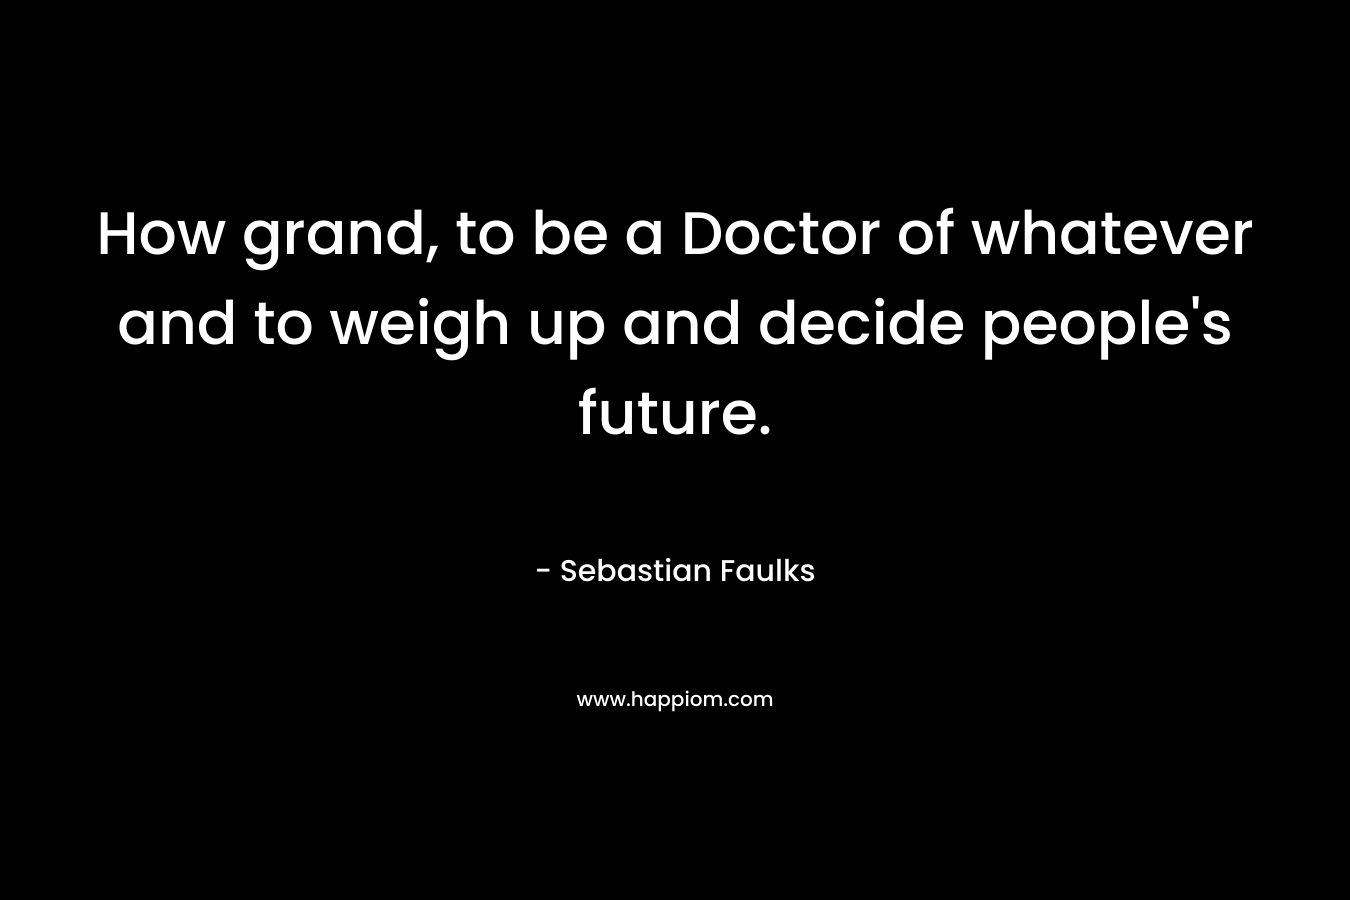 How grand, to be a Doctor of whatever and to weigh up and decide people’s future. – Sebastian Faulks